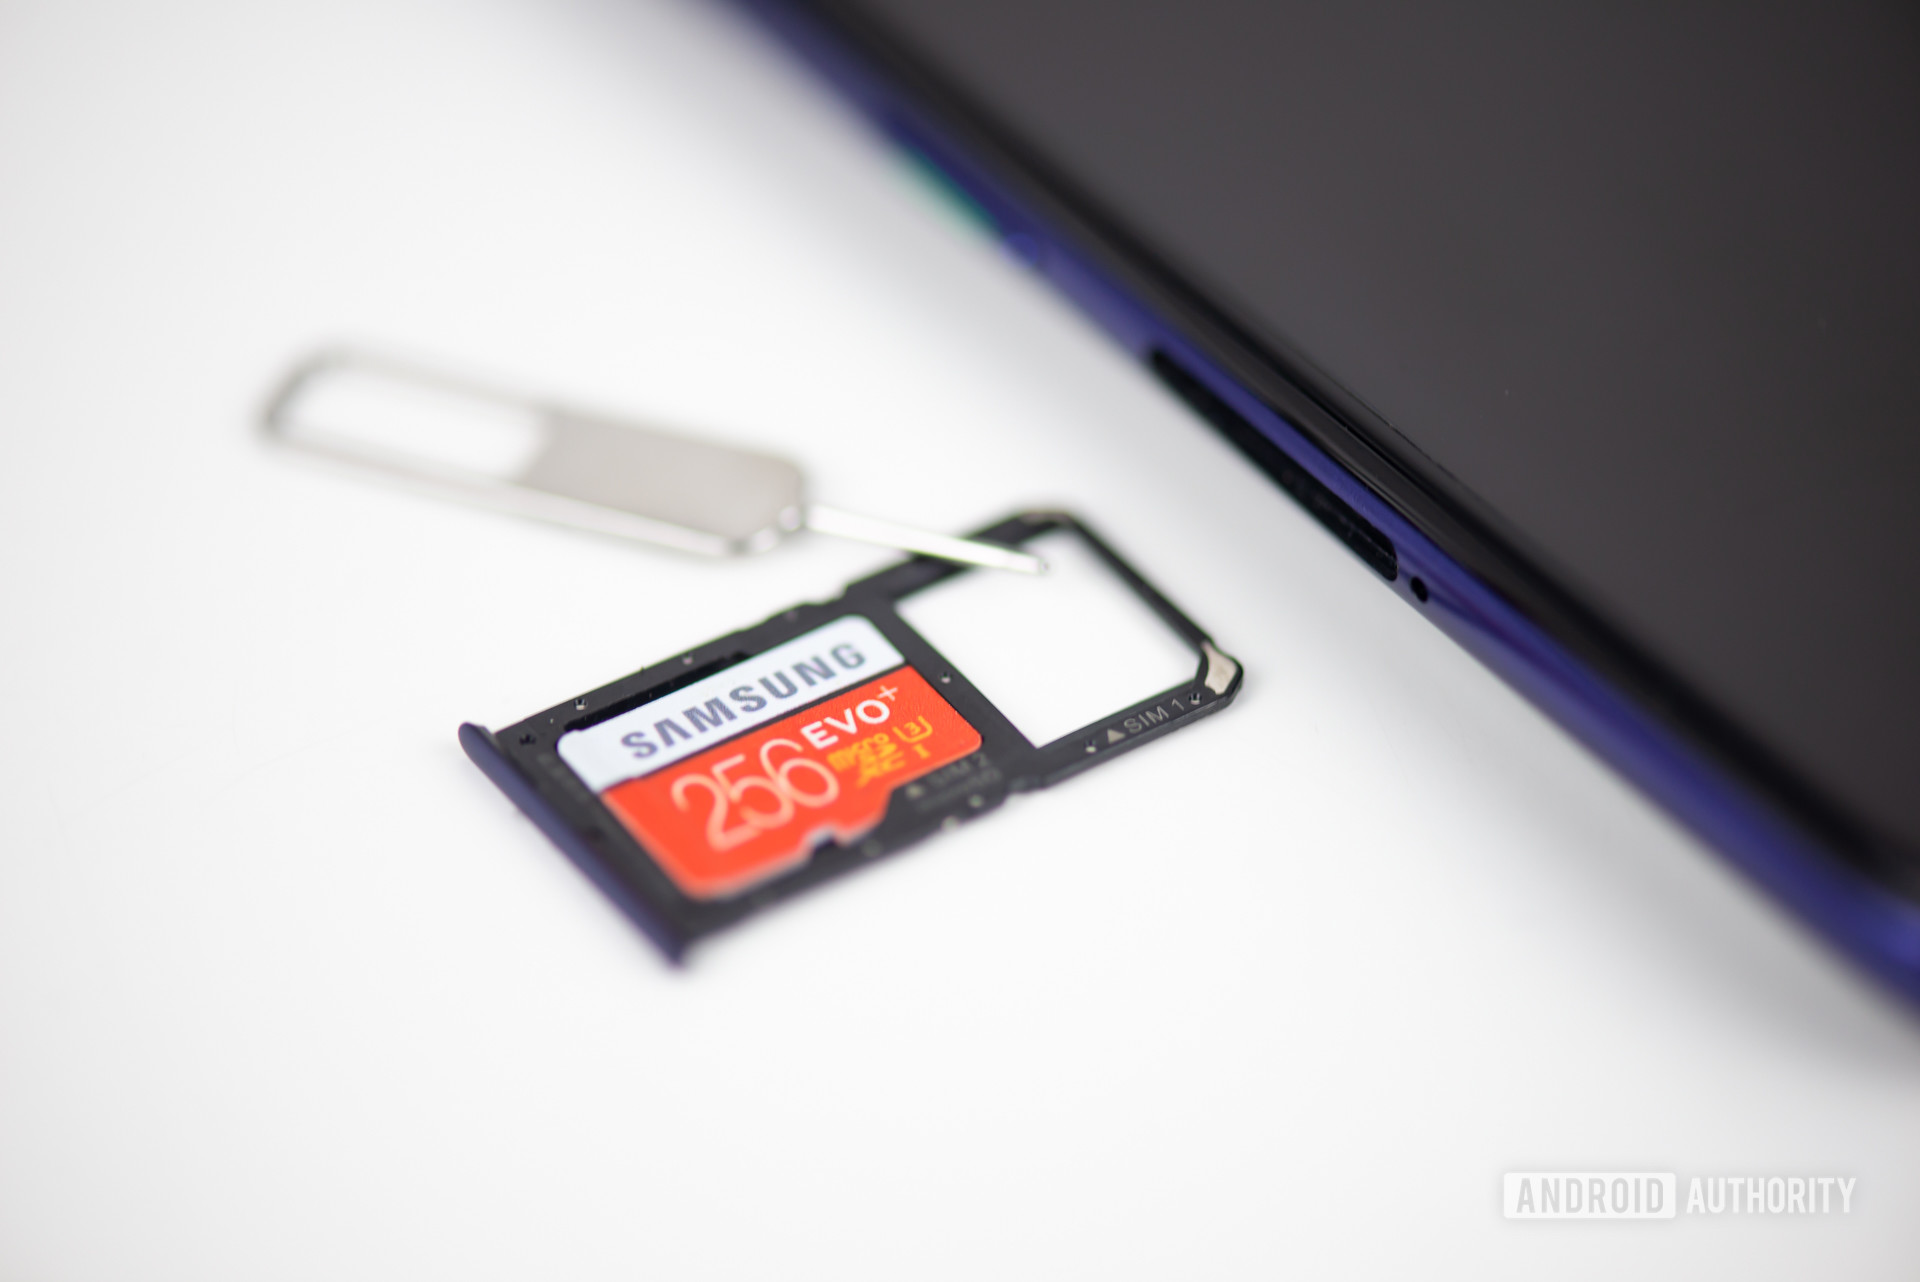 MicroSD card slot stock photo 3 - back up Android contacts